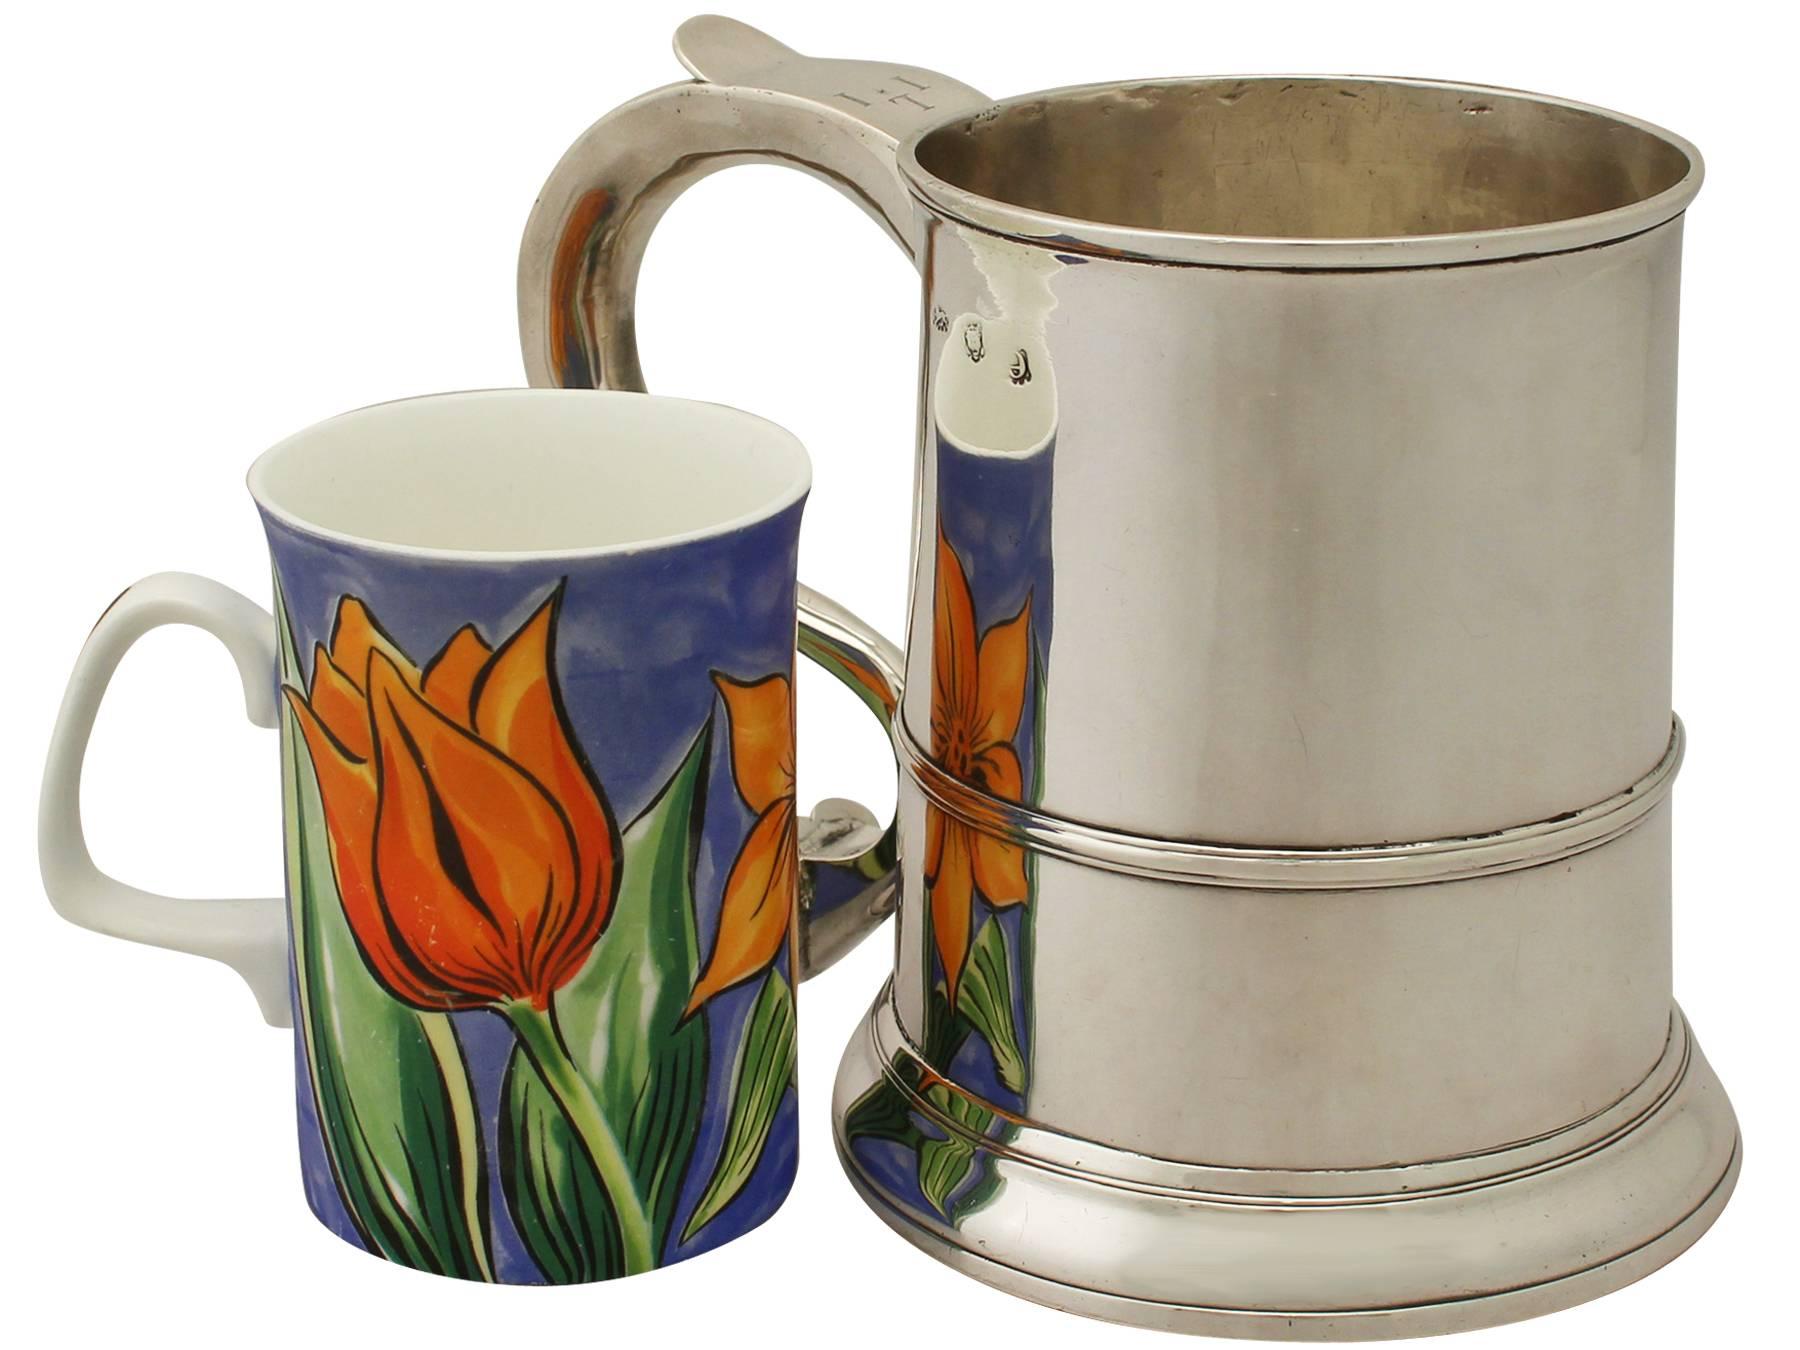 An exceptional, fine and impressive, large antique George II English sterling silver quart mug; an addition to our range of collectable Georgian silverware.

This exceptional antique George II sterling silver mug has a plain tapering cylindrical